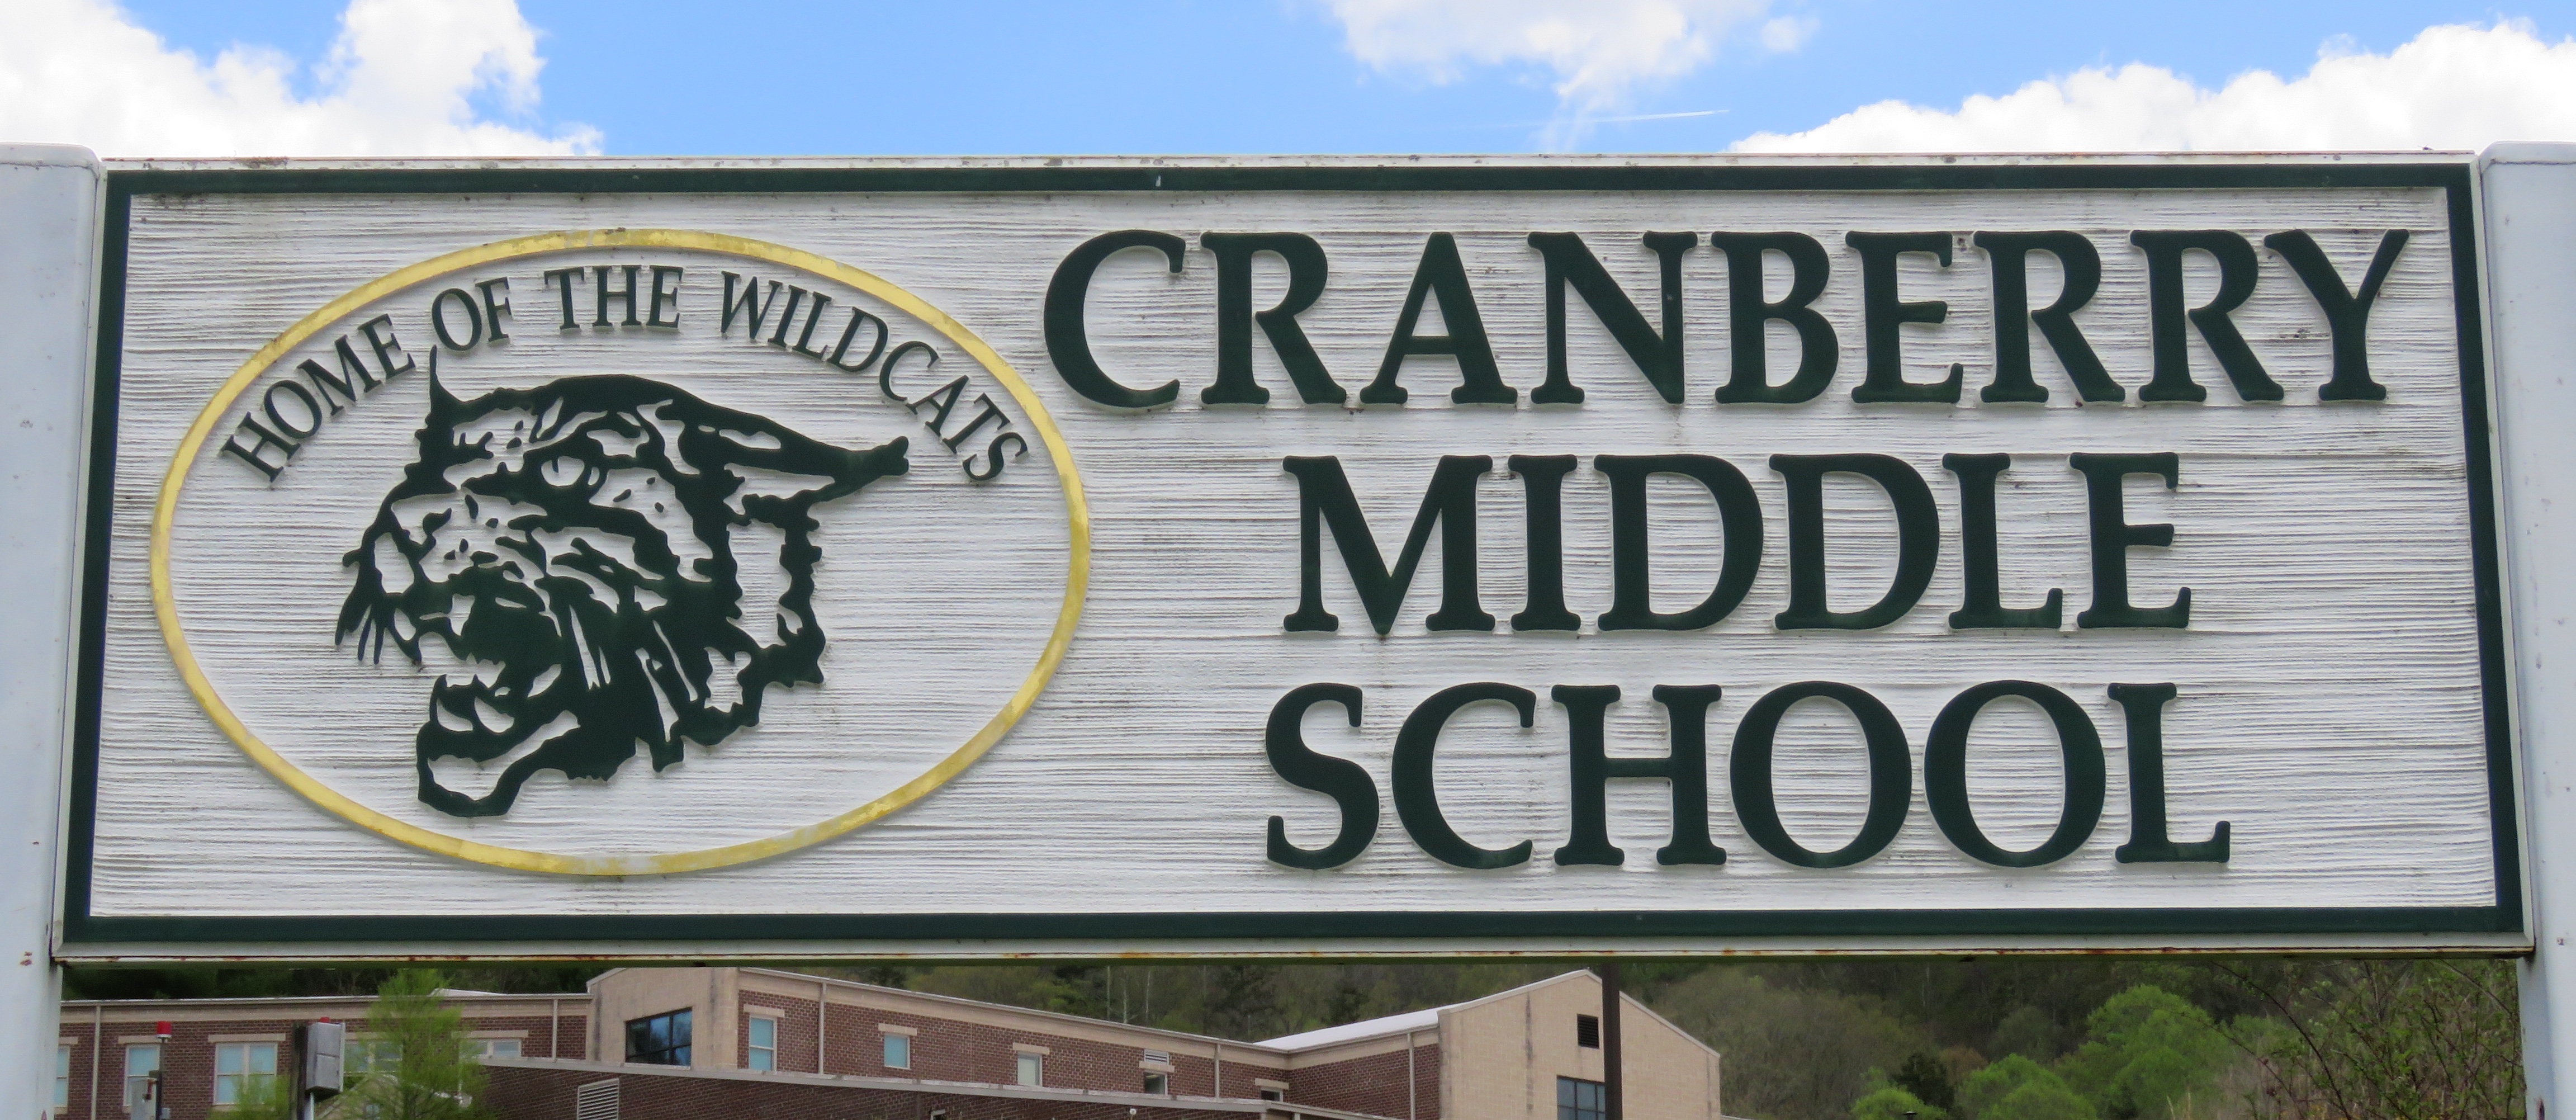 Cranberry Middle School sign